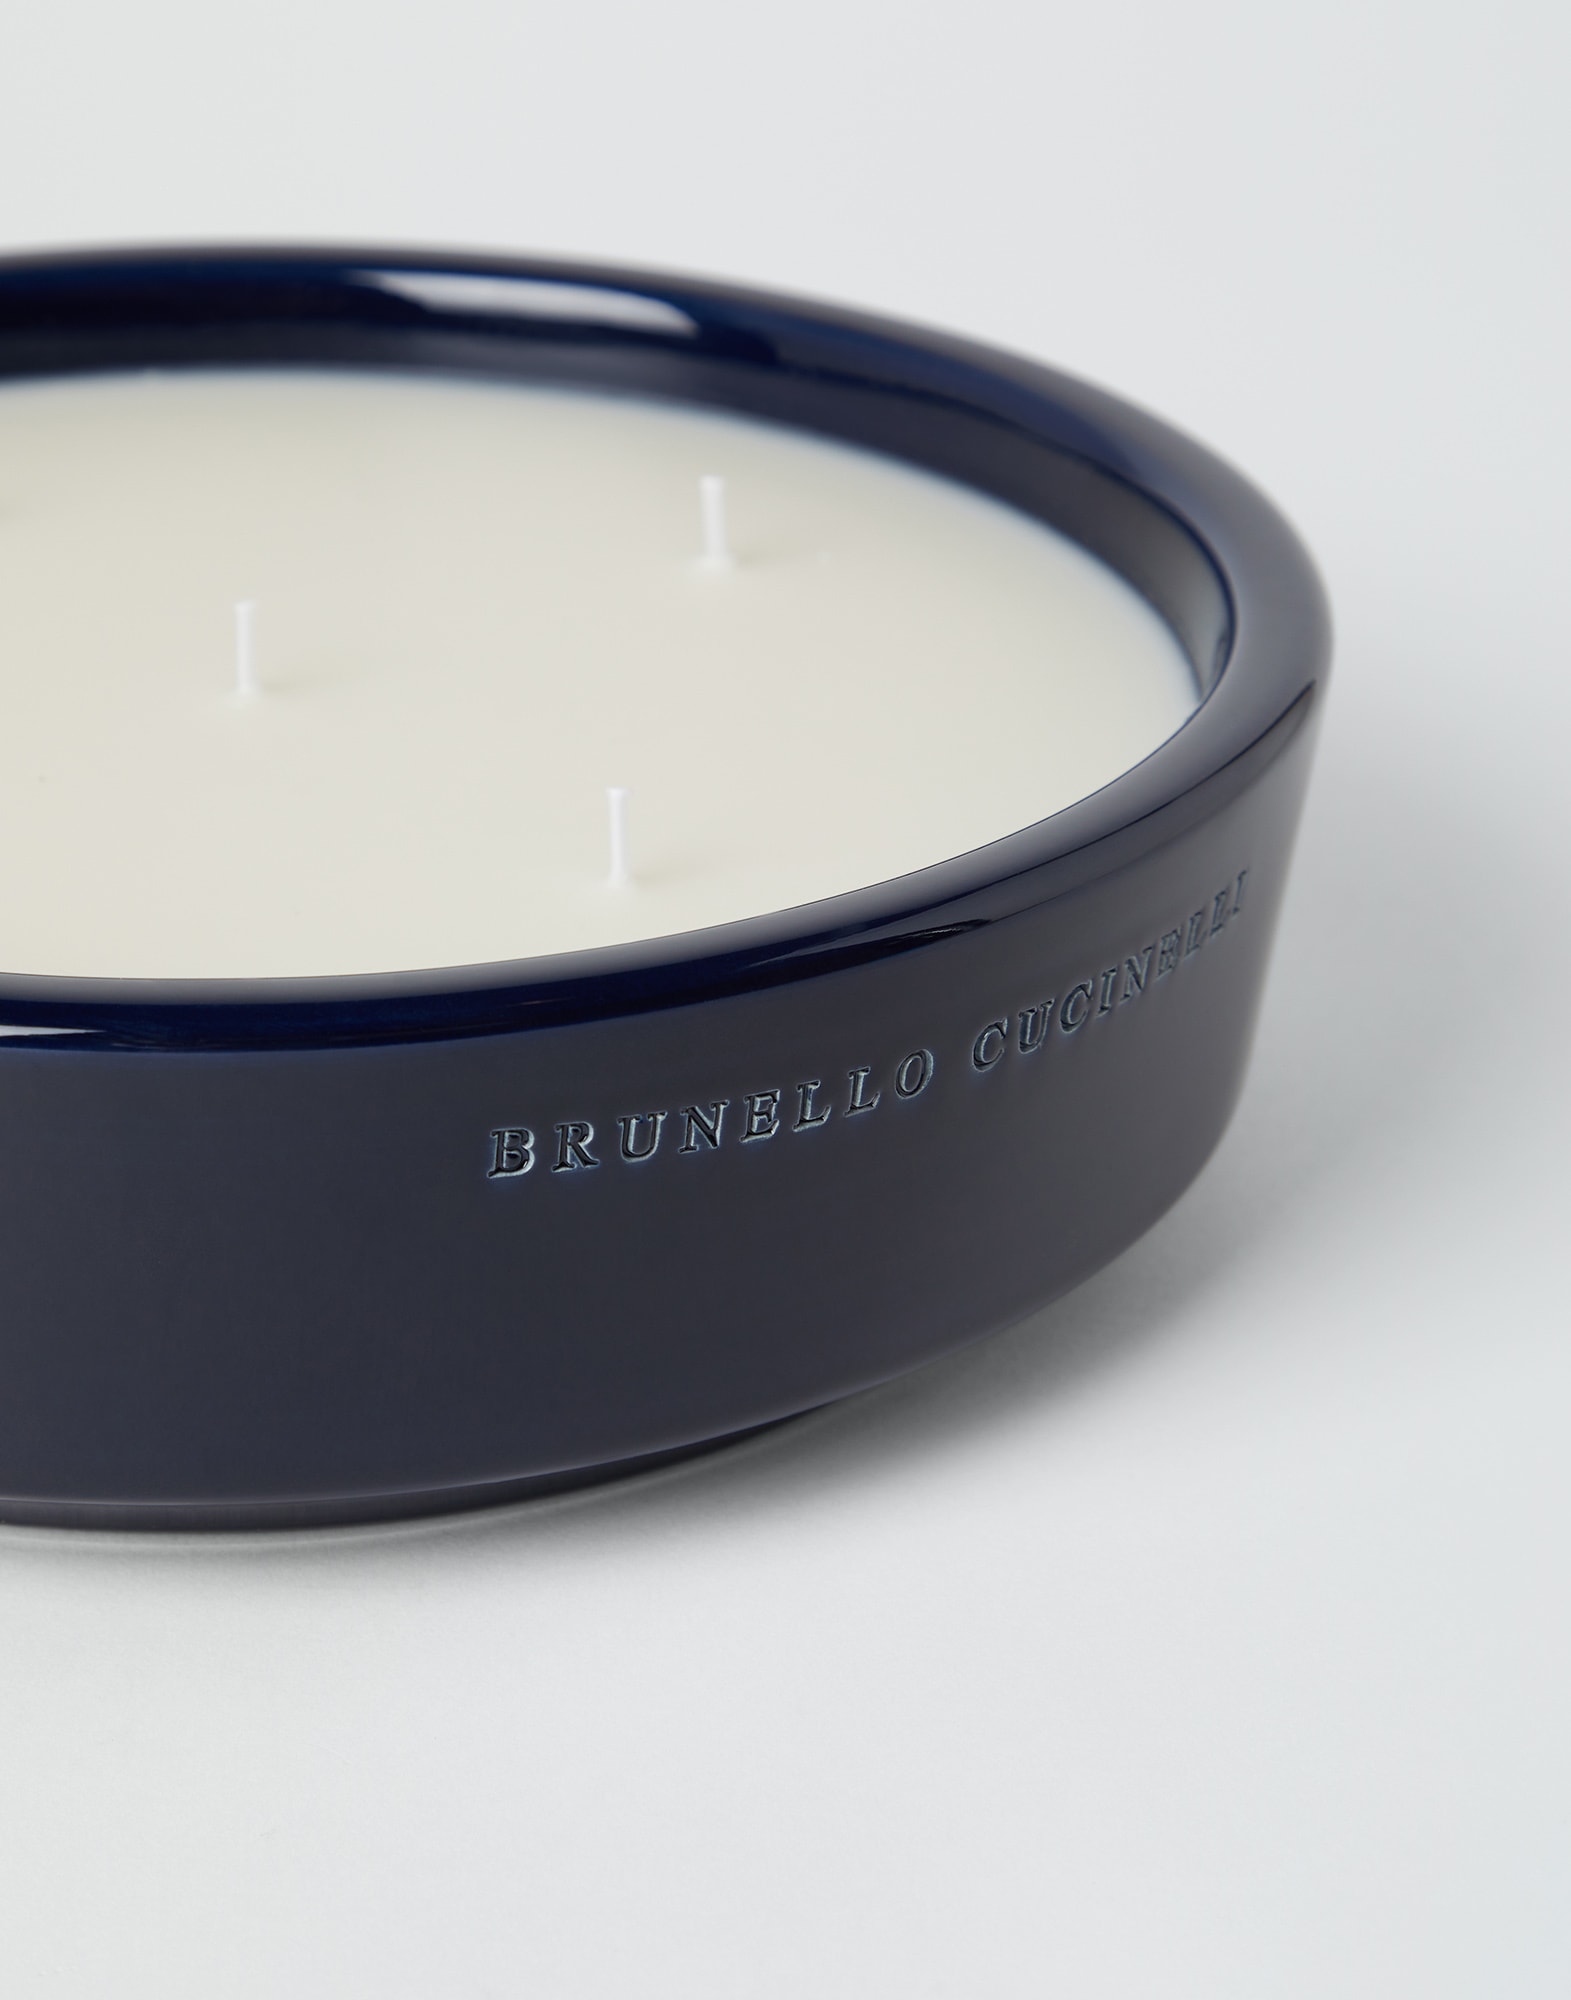 Brunello Cucinelli branded candle - Grey